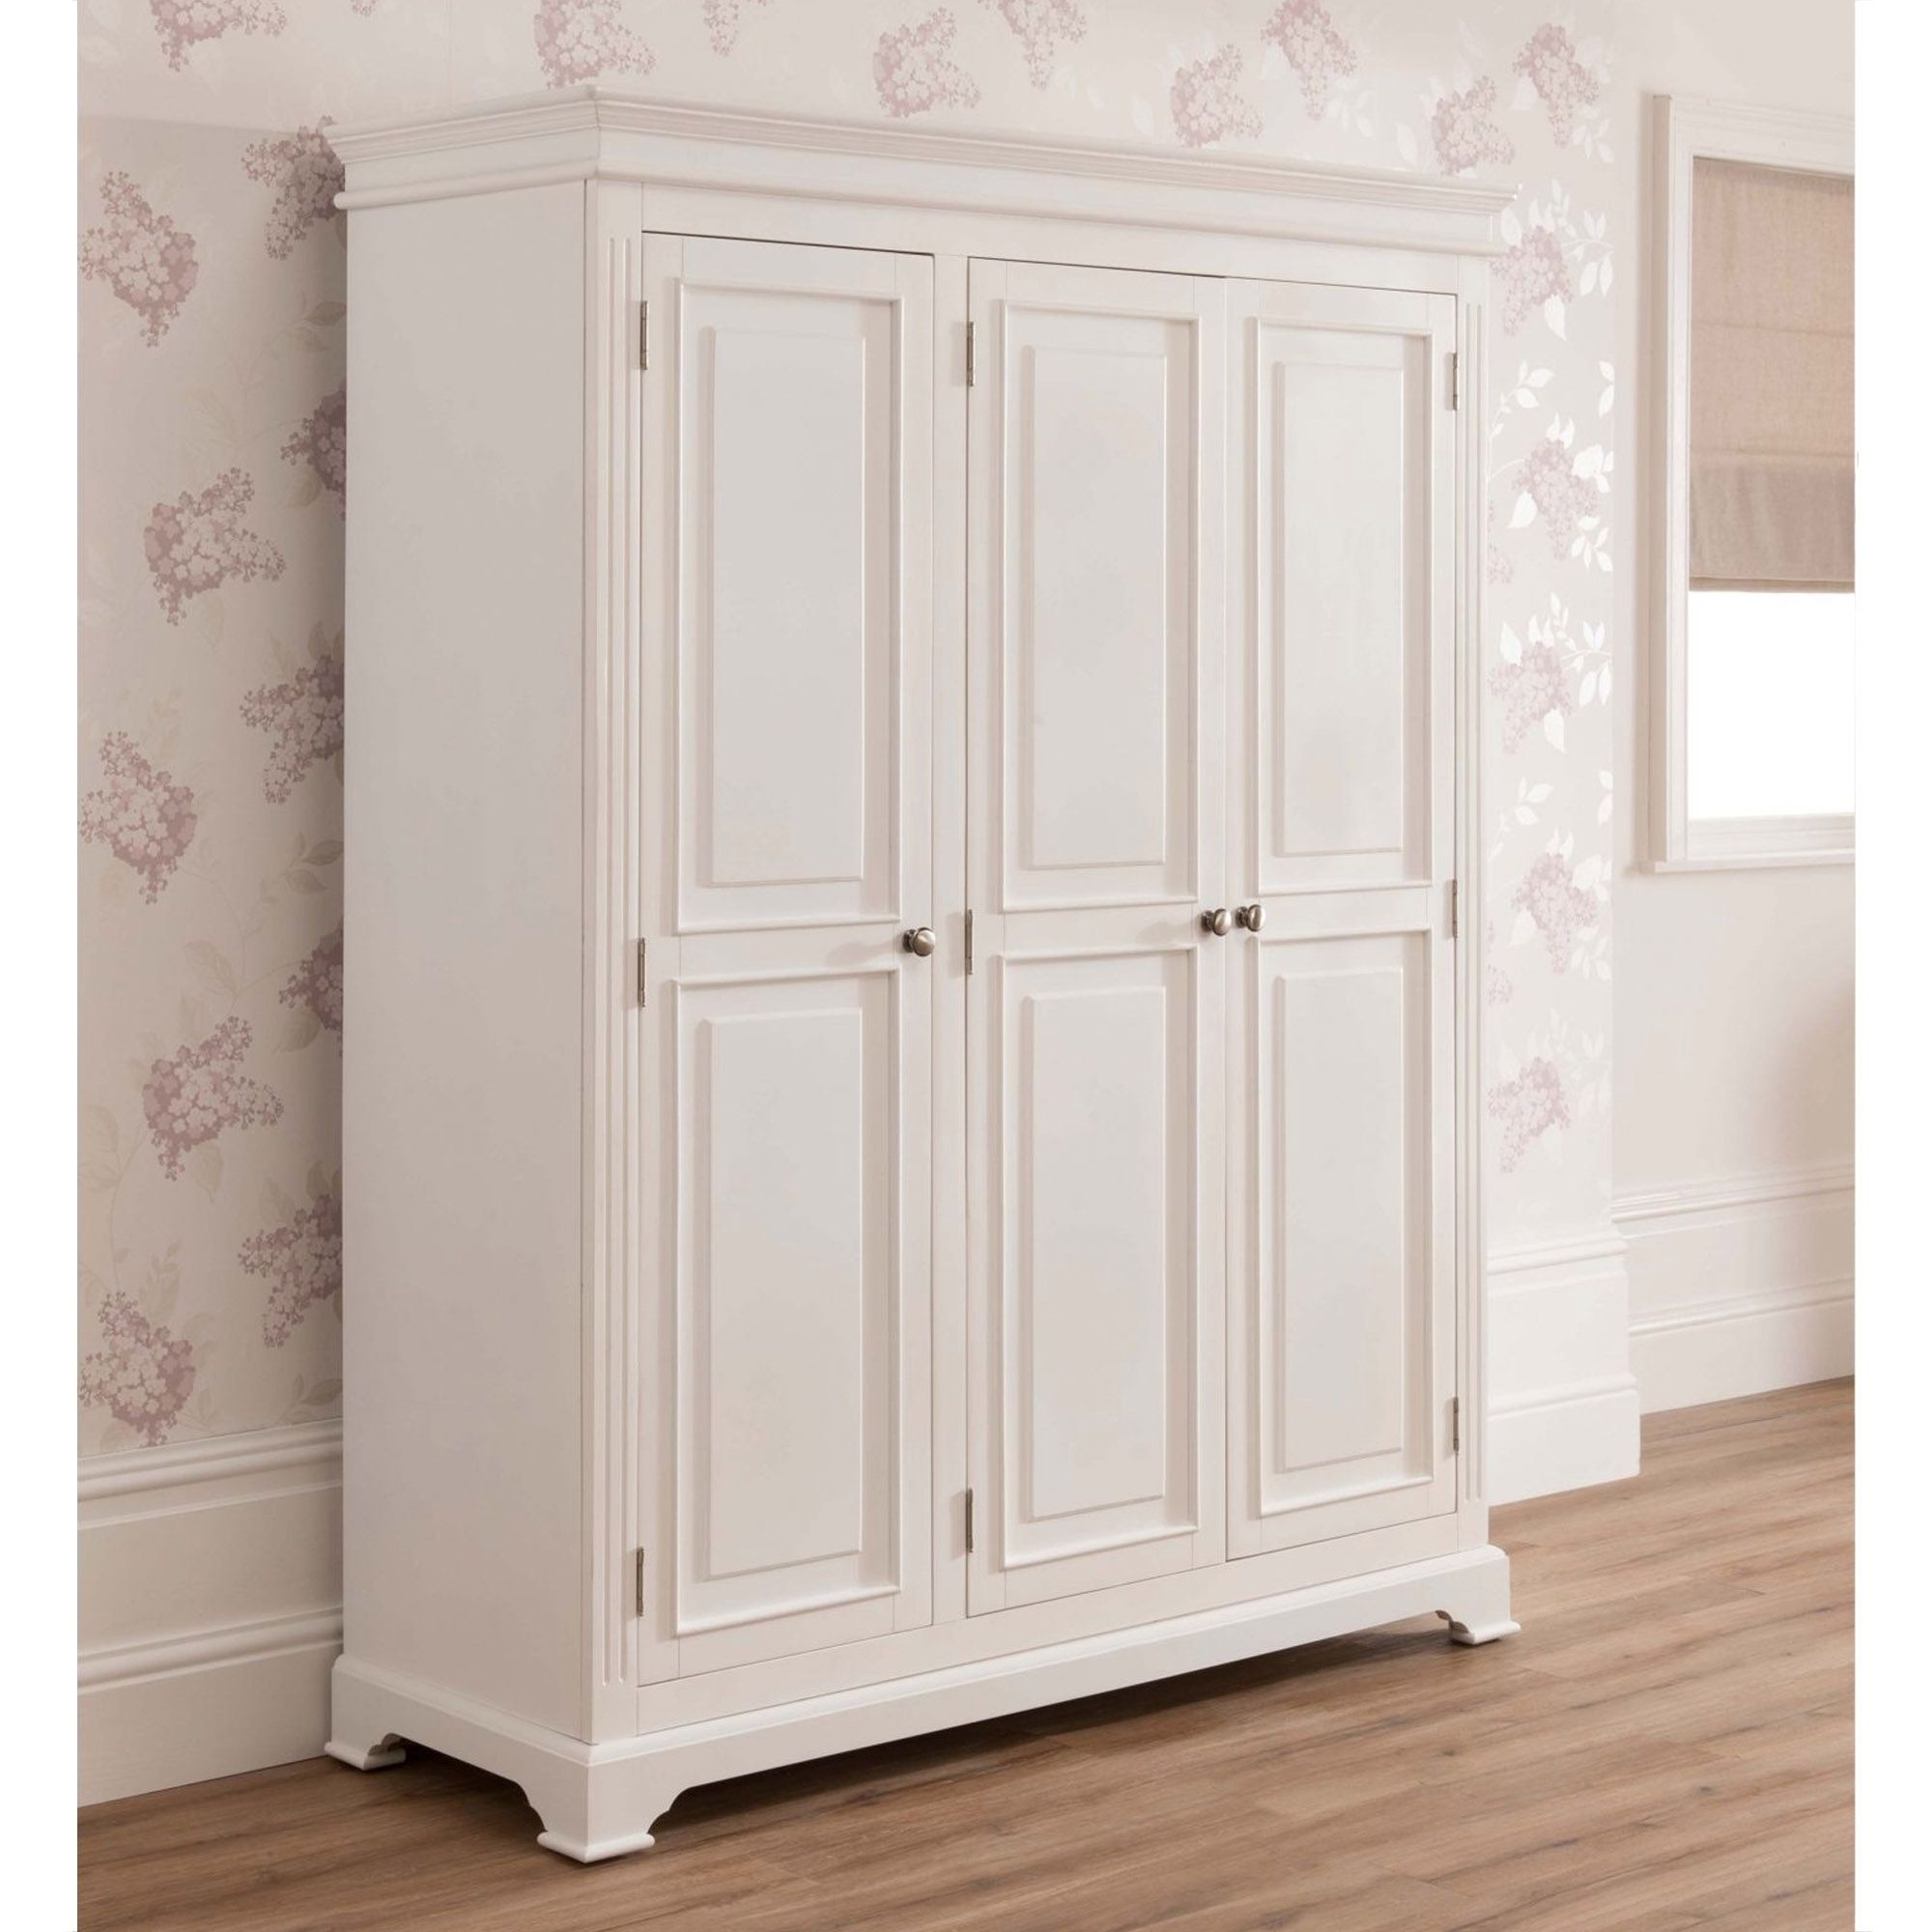 Sophia Shabby Chic Wardrobe Is A Fantastic Addition To Our Antique French  Furniture Intended For Sophia Wardrobes (View 8 of 20)